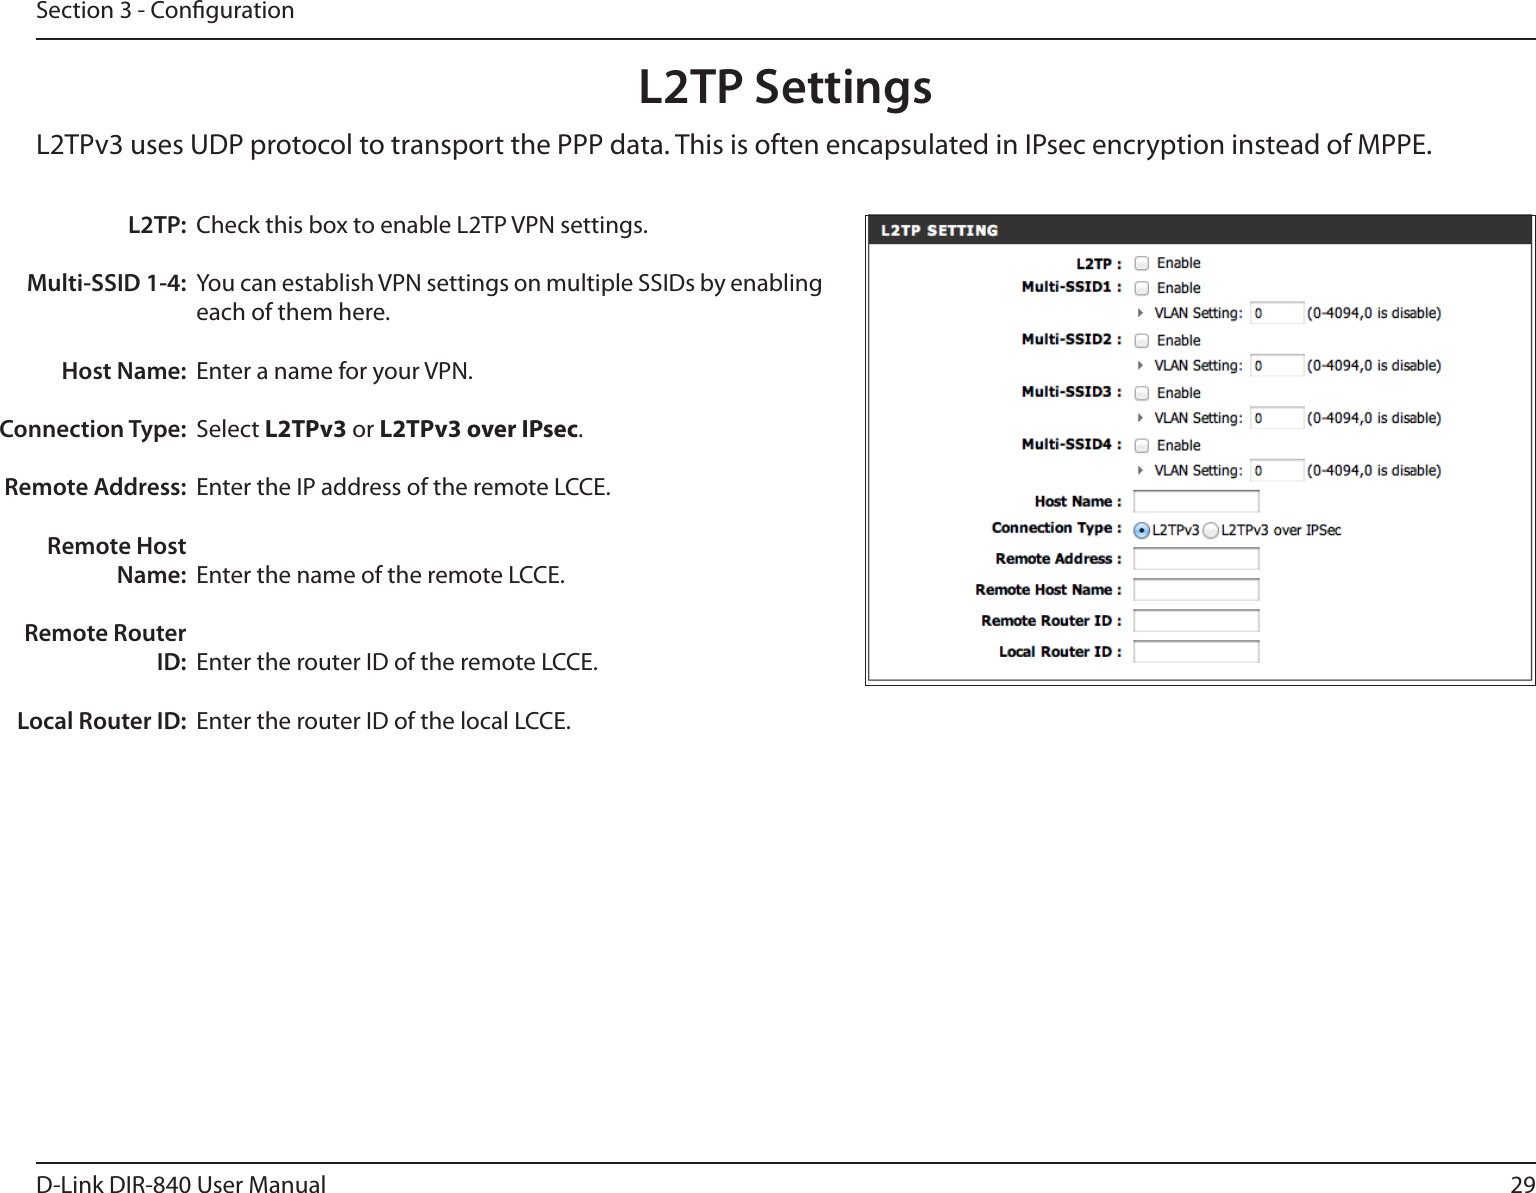 29D-Link DIR-840 User ManualSection 3 - CongurationL2TP SettingsL2TPv3 uses UDP protocol to transport the PPP data. This is often encapsulated in IPsec encryption instead of MPPE.Check this box to enable L2TP VPN settings.You can establish VPN settings on multiple SSIDs by enabling each of them here.Enter a name for your VPN.Select L2TPv3 or L2TPv3 over IPsec.Enter the IP address of the remote LCCE.Enter the name of the remote LCCE.Enter the router ID of the remote LCCE.Enter the router ID of the local LCCE.L2TP:Multi-SSID 1-4:Host Name:Connection Type:Remote Address:Remote Host Name:Remote Router ID:Local Router ID: